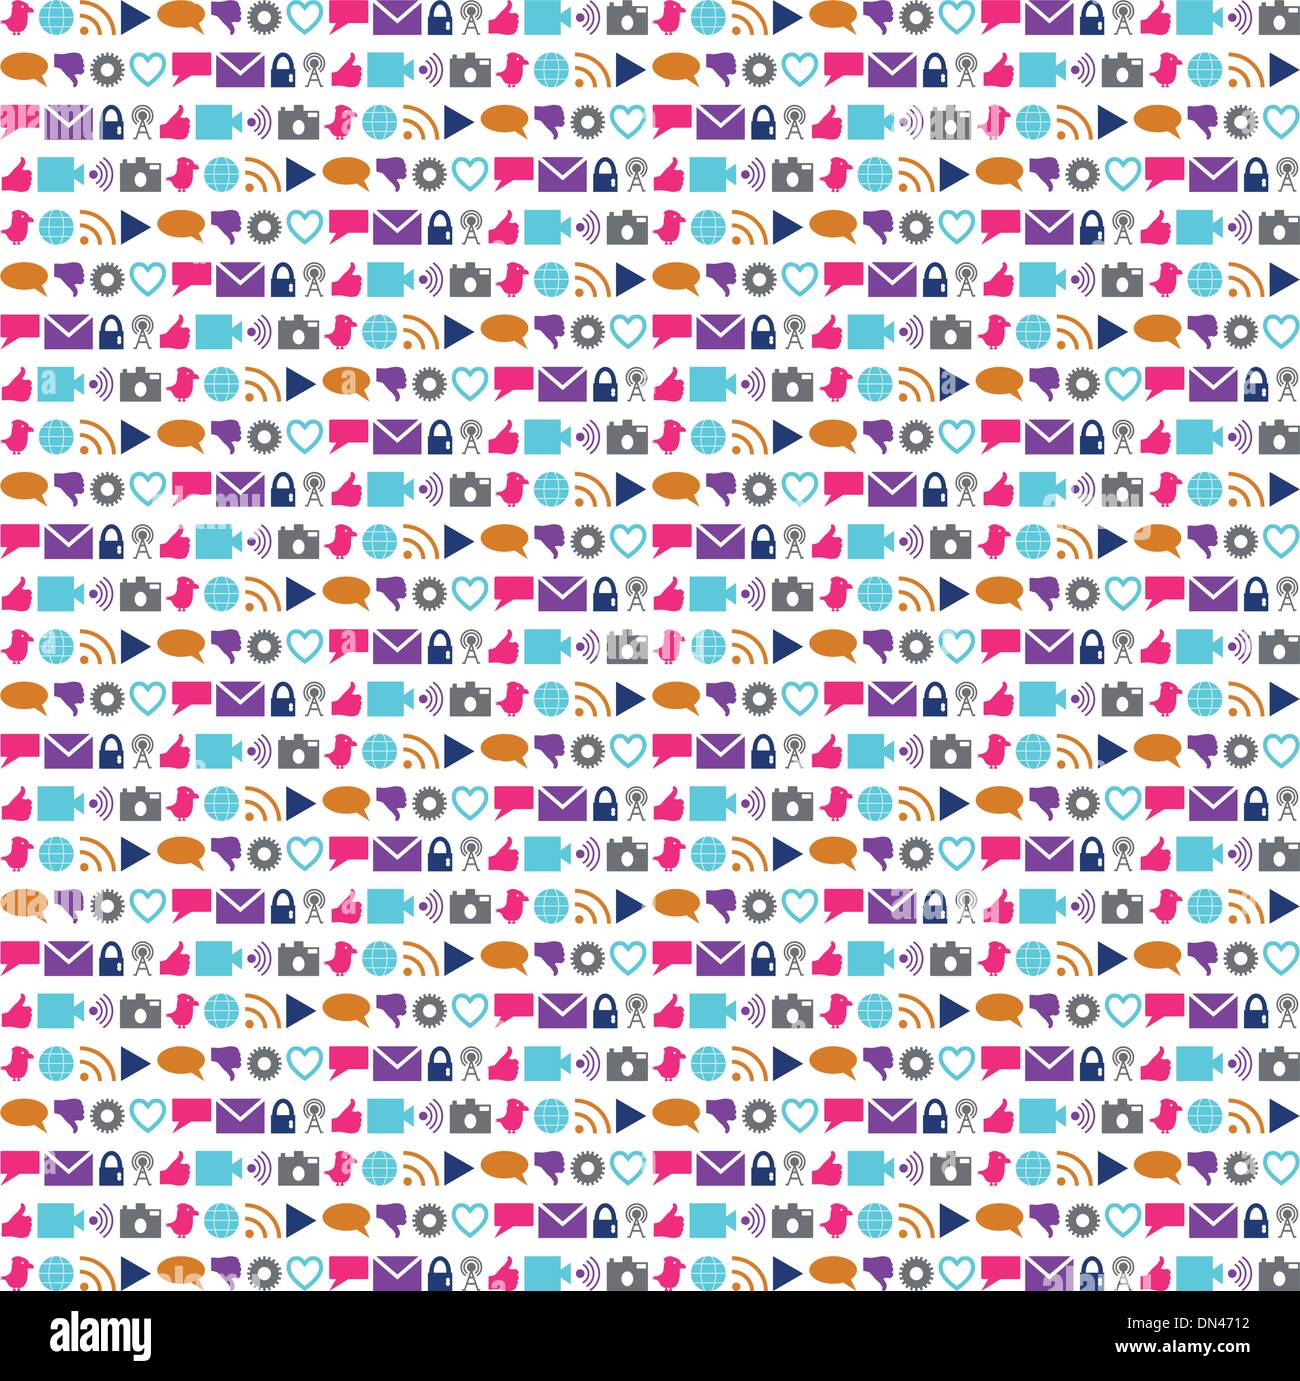 Social technology and networking icon background pattern Stock Vector